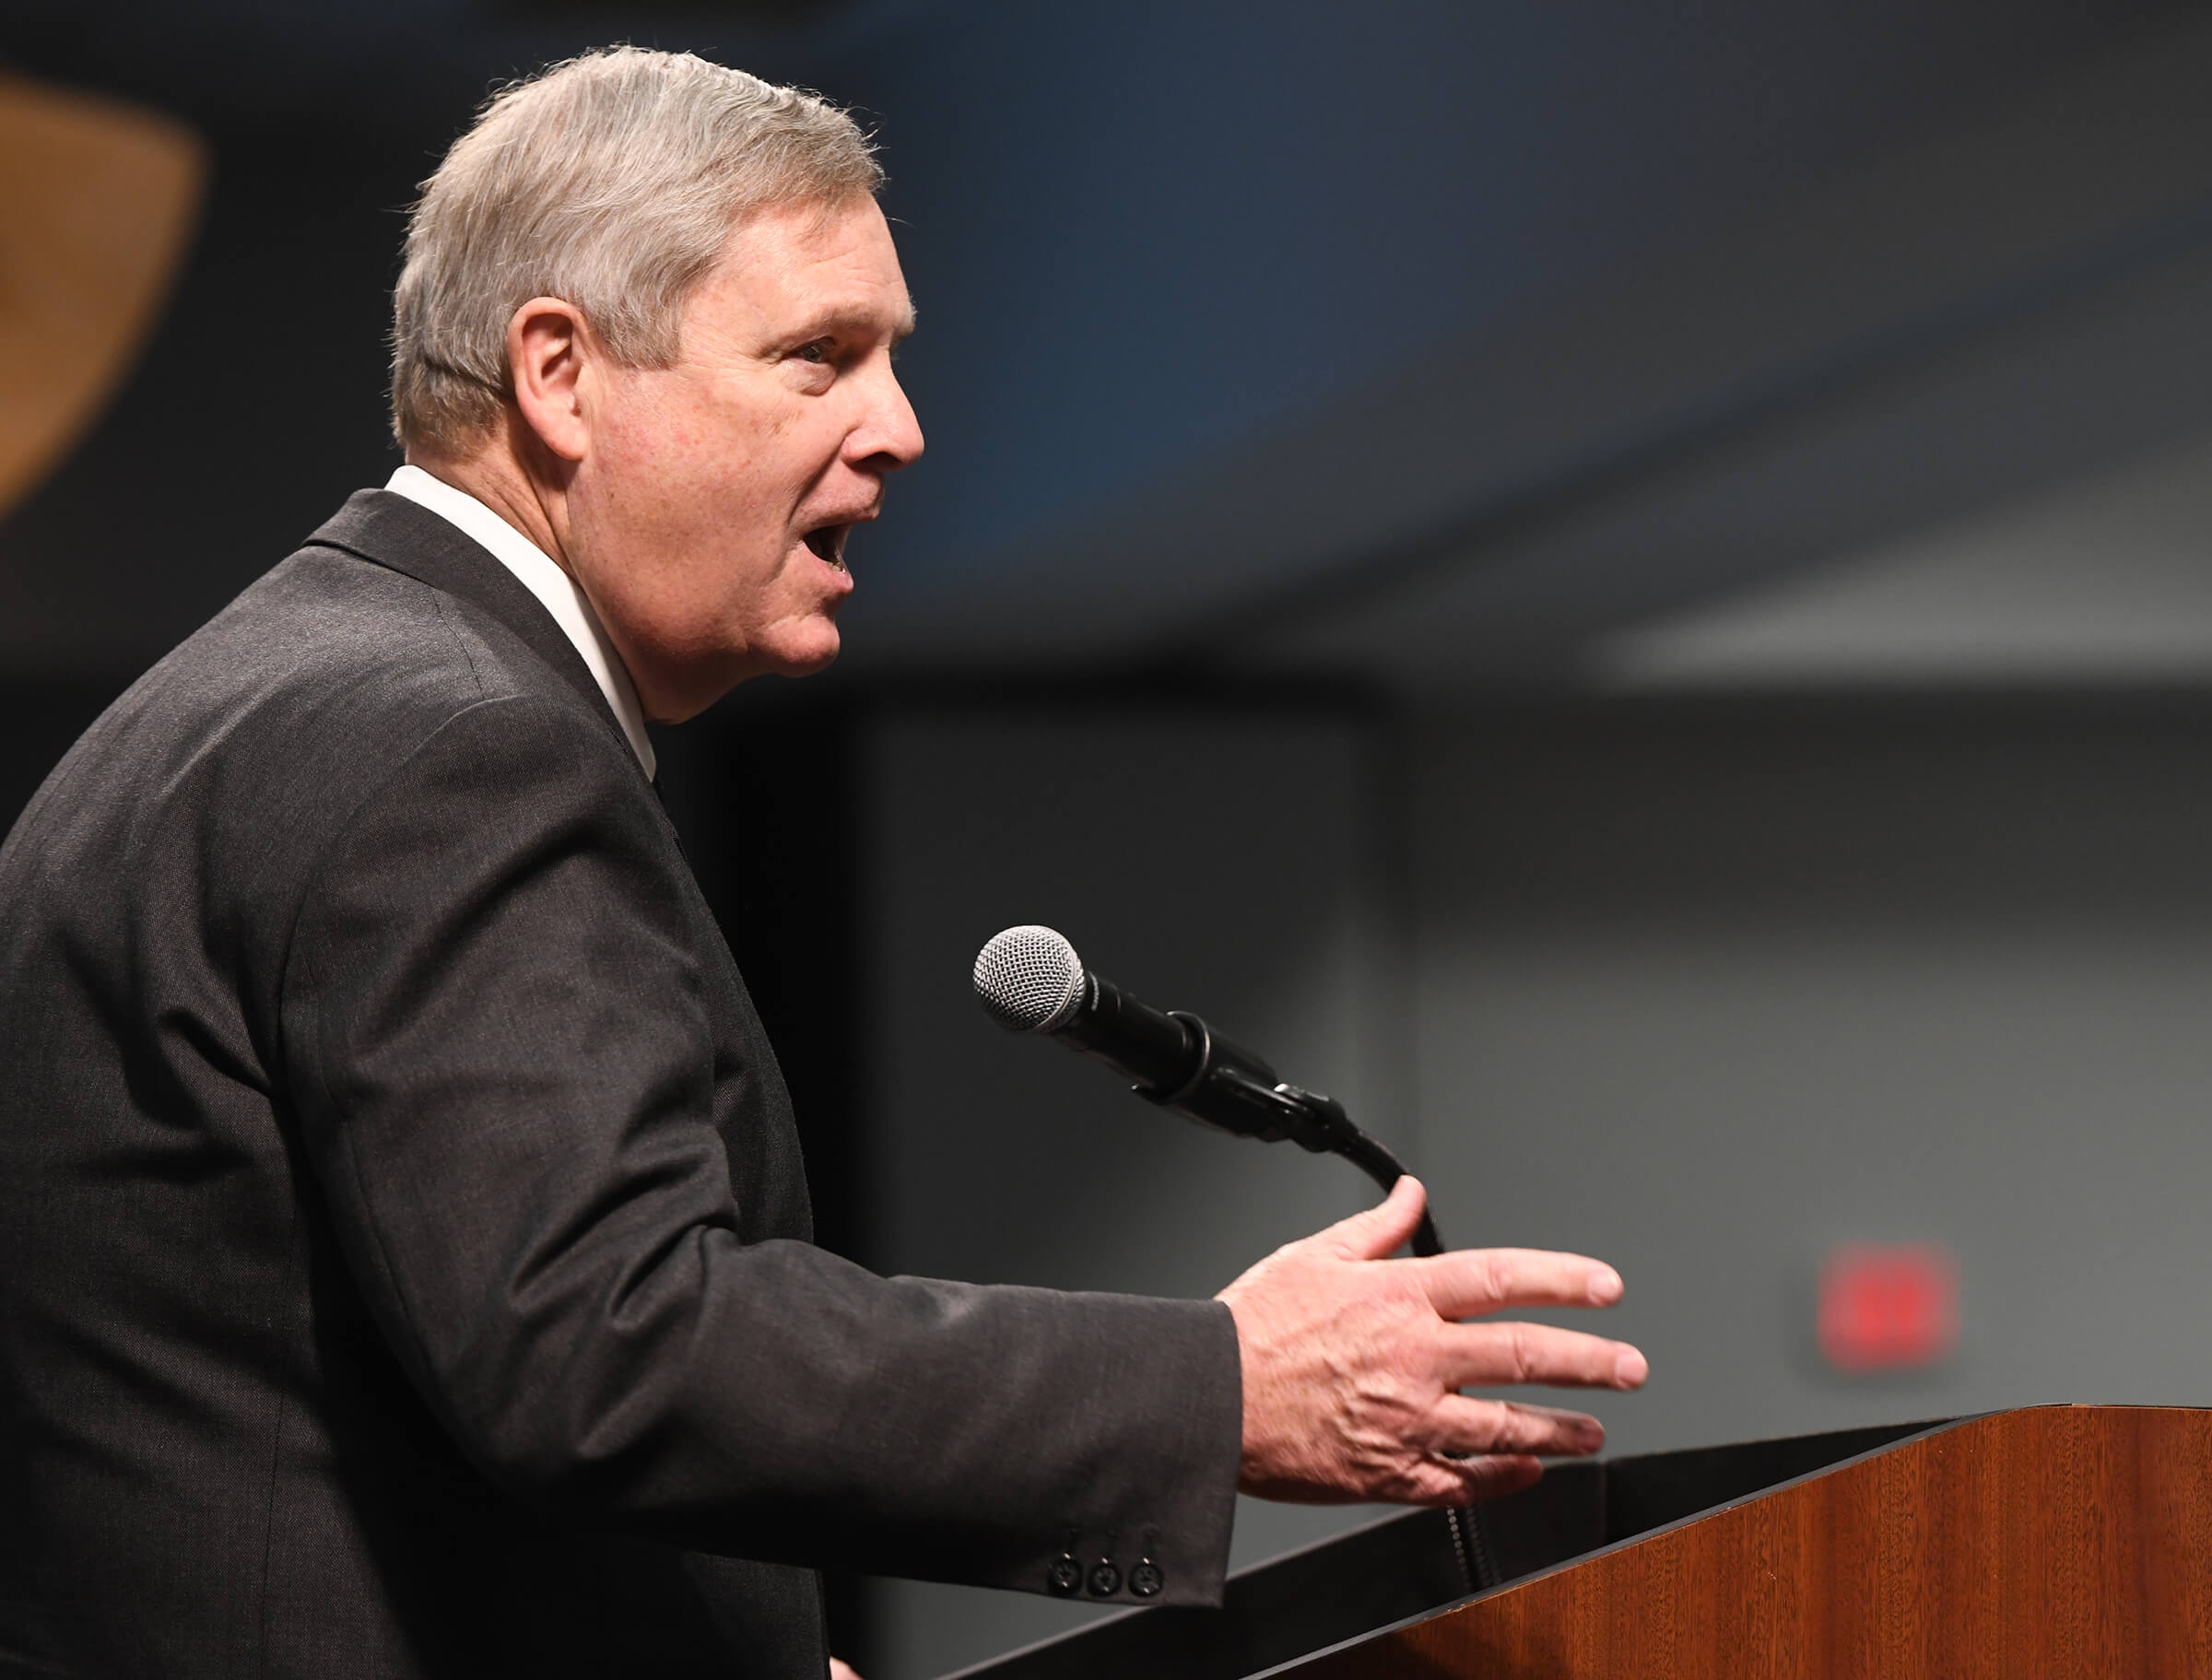 Tom Vilsack speaks passionately into a microphone